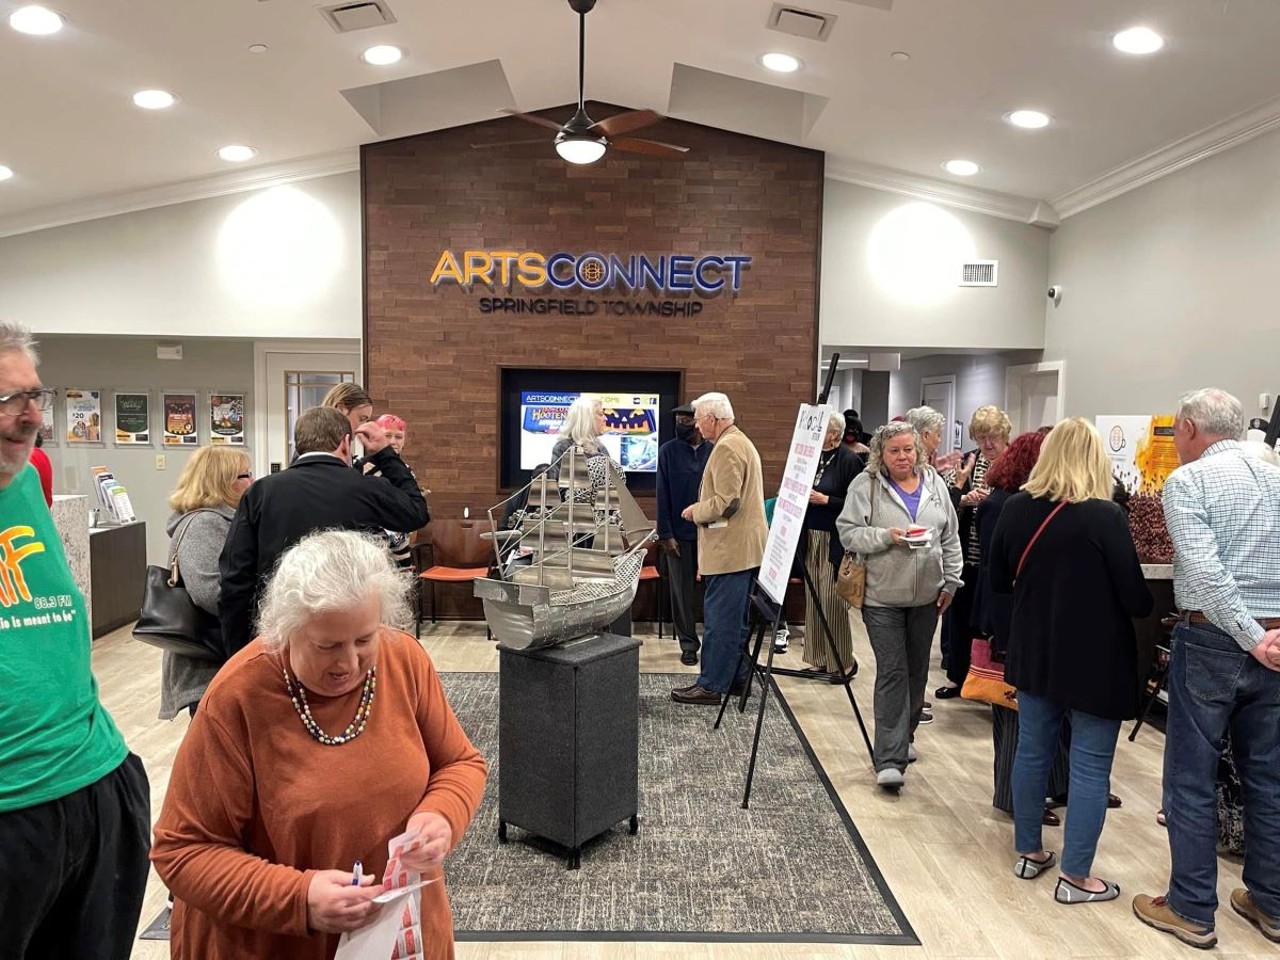 ArtLocal Art Show
When: Oct. 6 from 7-10 p.m. & Oct. 7 from 10 a.m.-2 p.m.
Where: The Grove Event Center, Winton Woods
What: A two-day celebration of the arts.
Who: ArtsConnect and participating artists.
Why: For the art show, the event center is adopting a theme described as a modern spin on the Jazz Age.